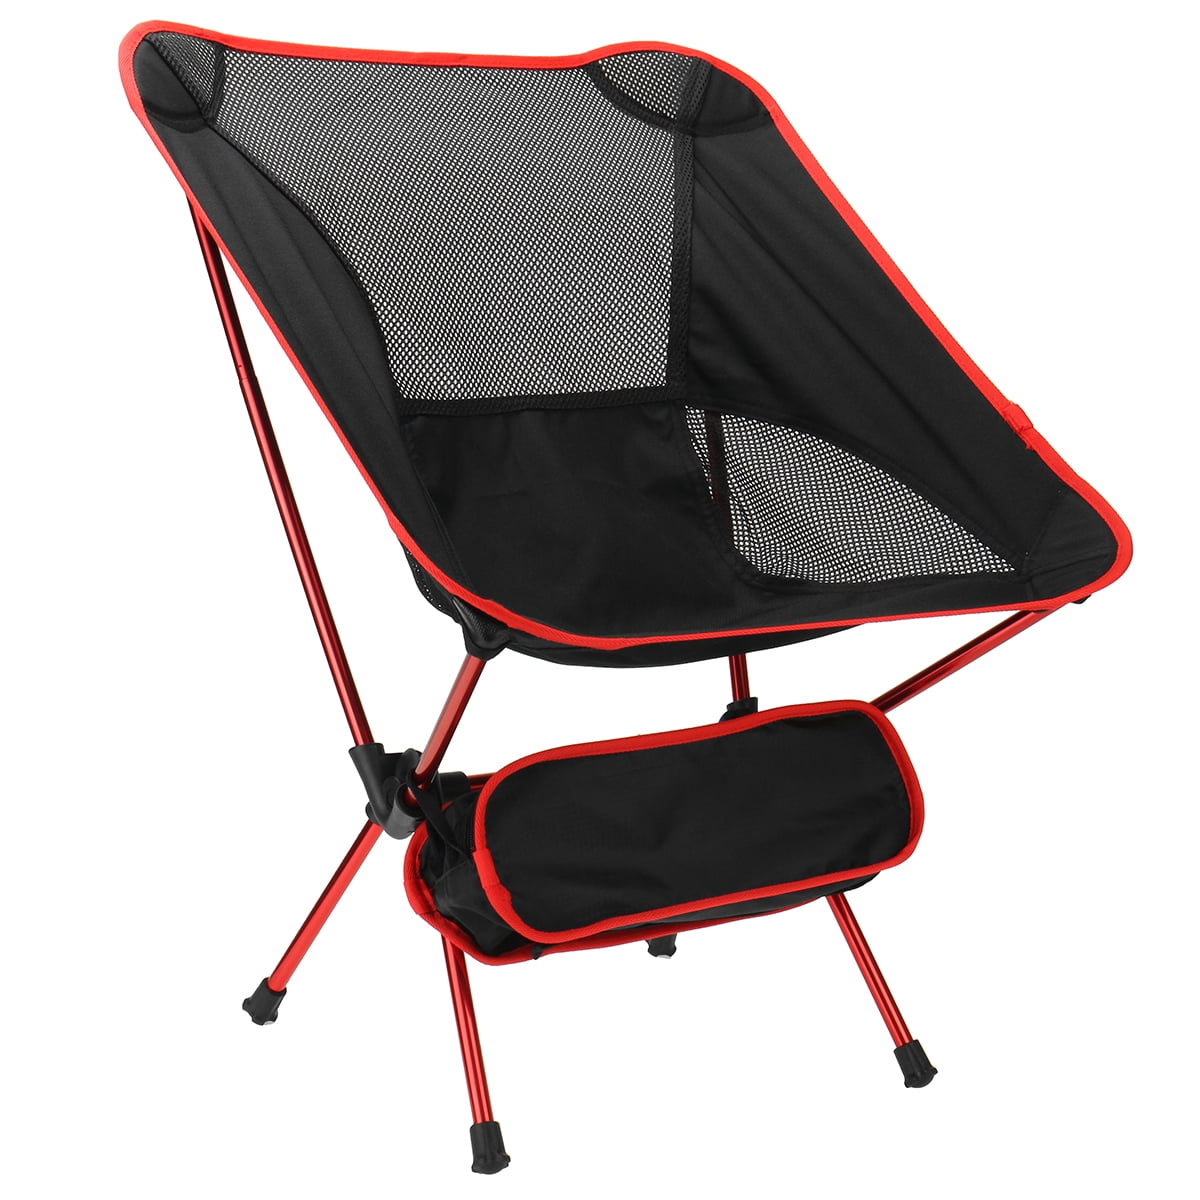 Details about   Camping Chair Backpacking Portable Compact Ultralight with Carry Bag 2 Pack Red